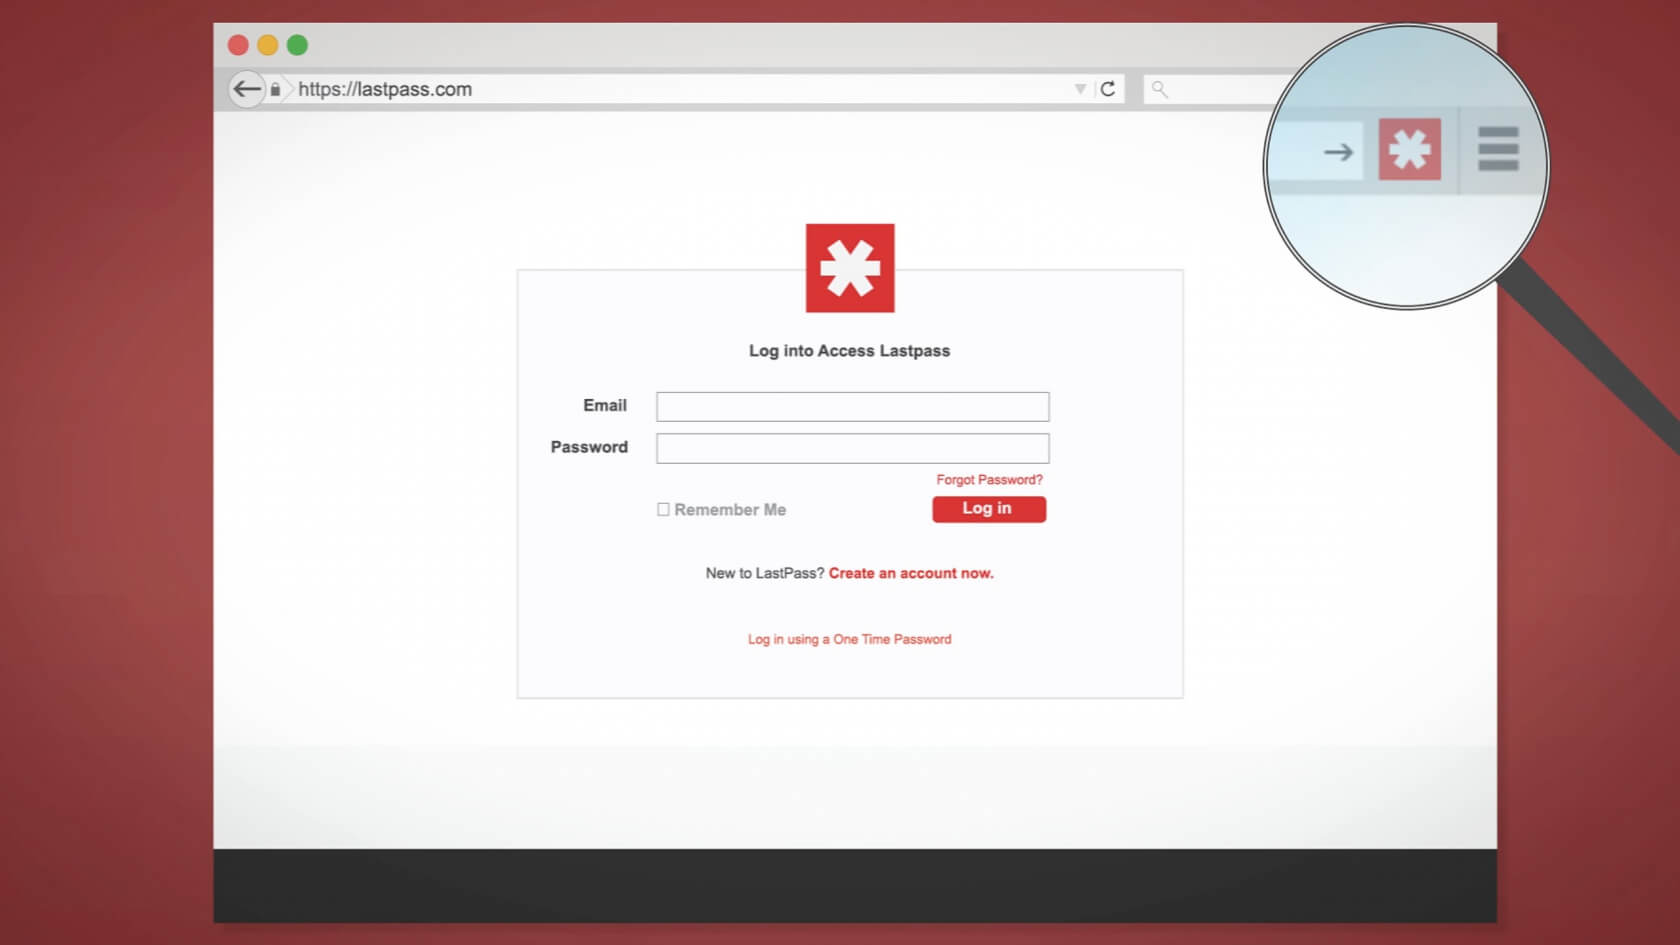 LastPass reveals new pricing plan that doubles cost of Premium tier, removes some free features